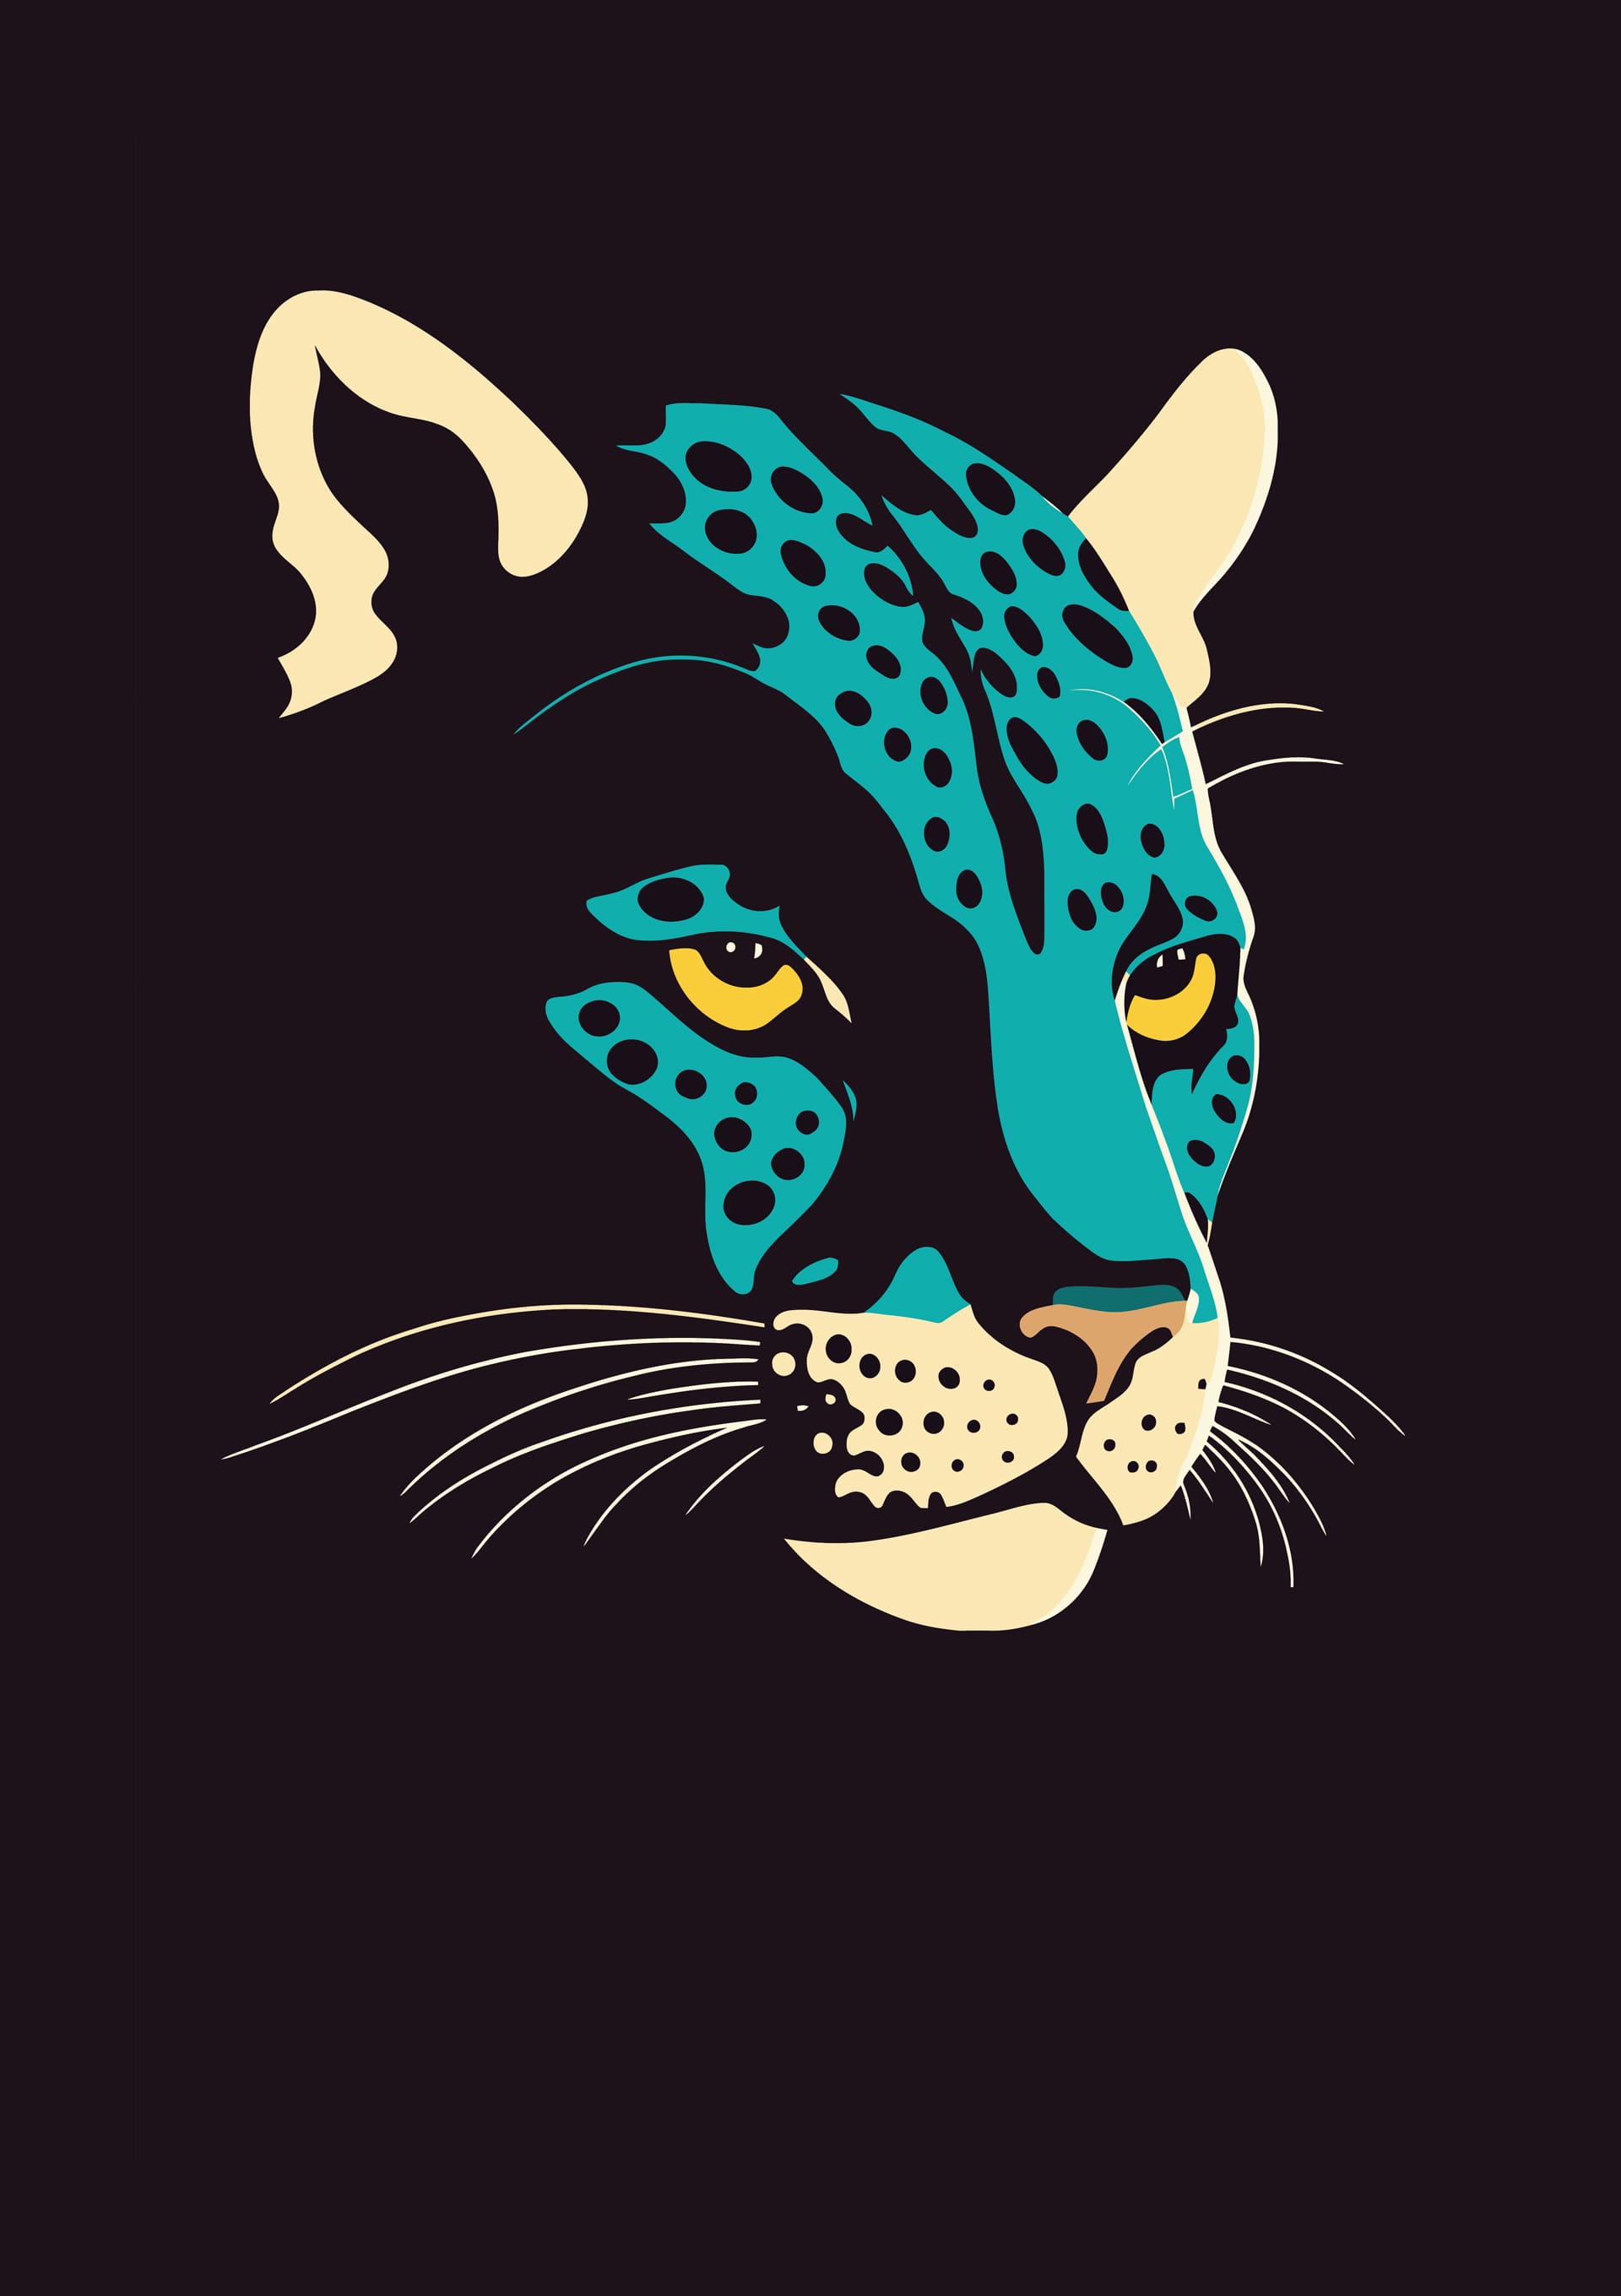 Illustration black panther dark background with leaves cute animal profile pictures